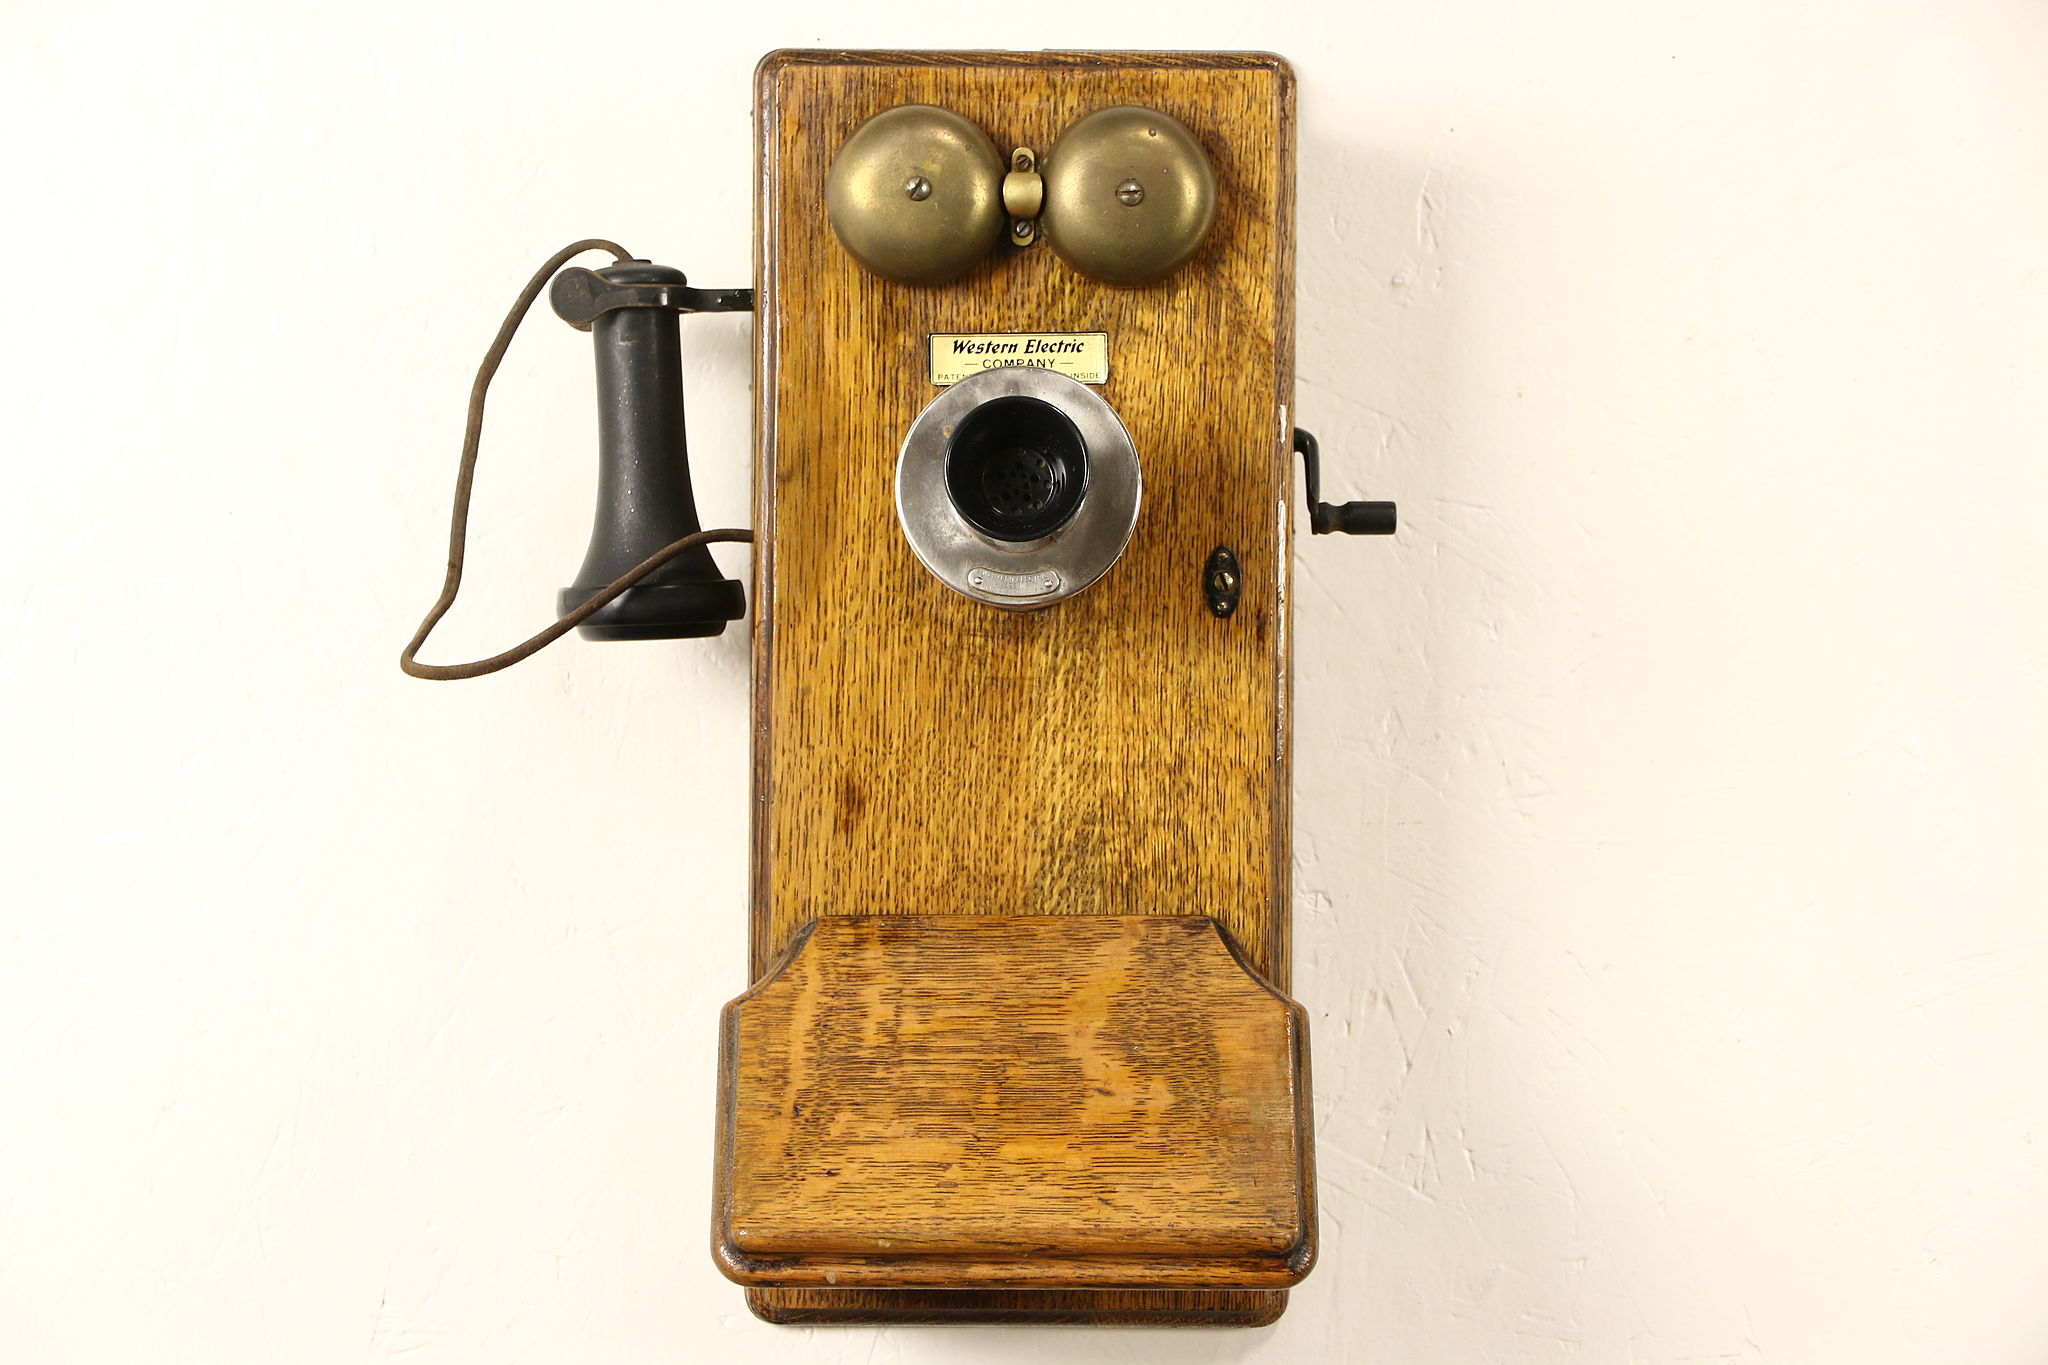 Sold Oak Western Electric Signed Antique Wall Phone Crank Generator Pat 1913 Harp Gallery Antiques Furniture